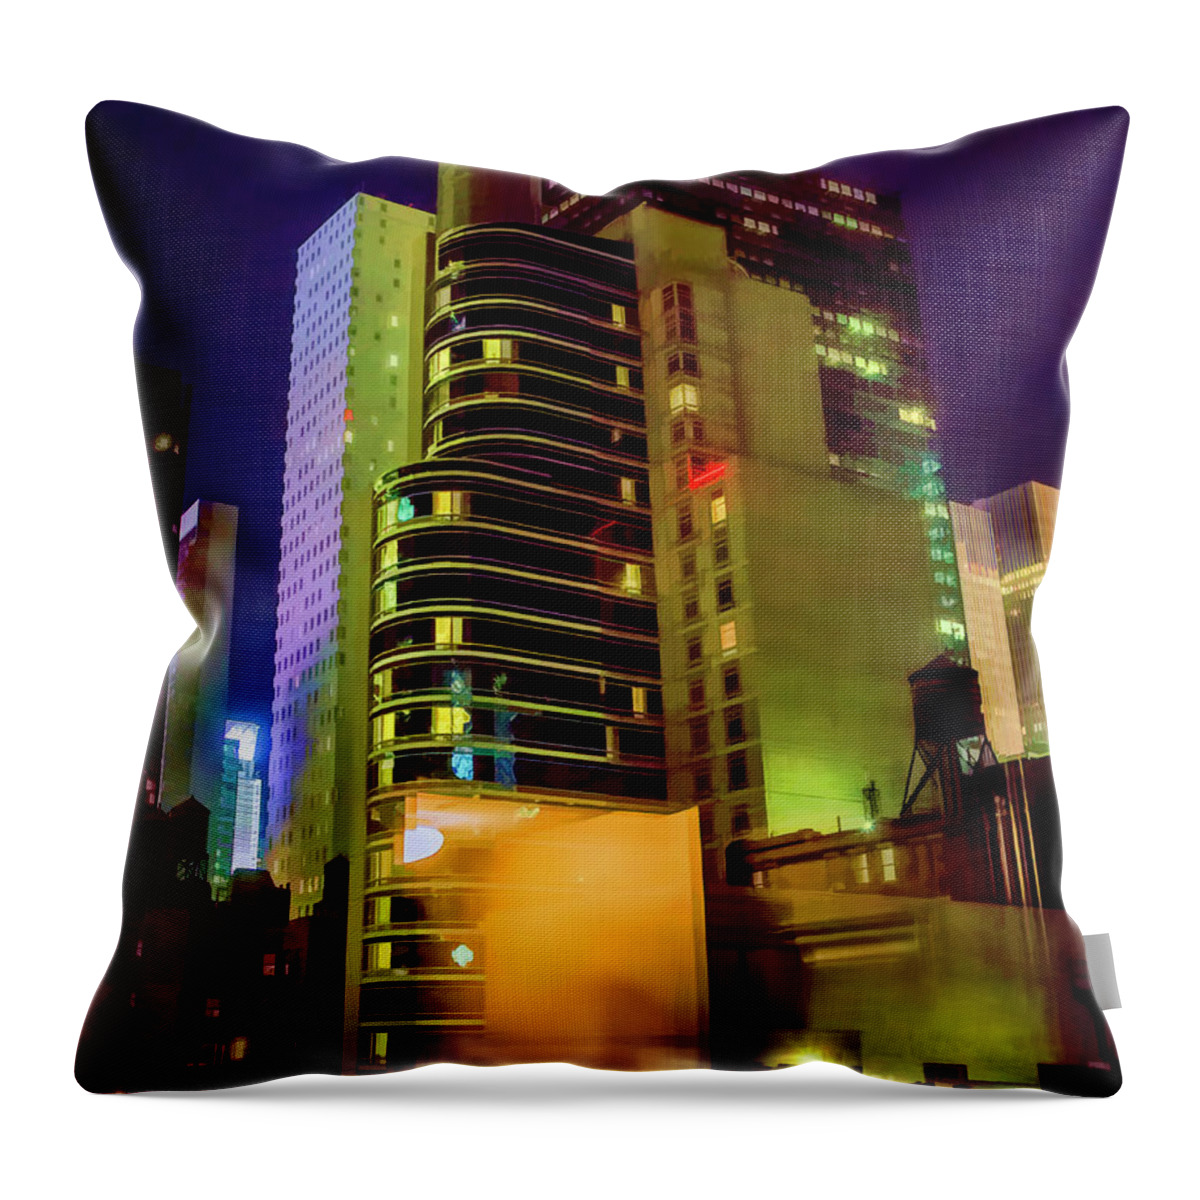 New York Throw Pillow featuring the photograph Digital Paint Filters Architecture NYC by Chuck Kuhn